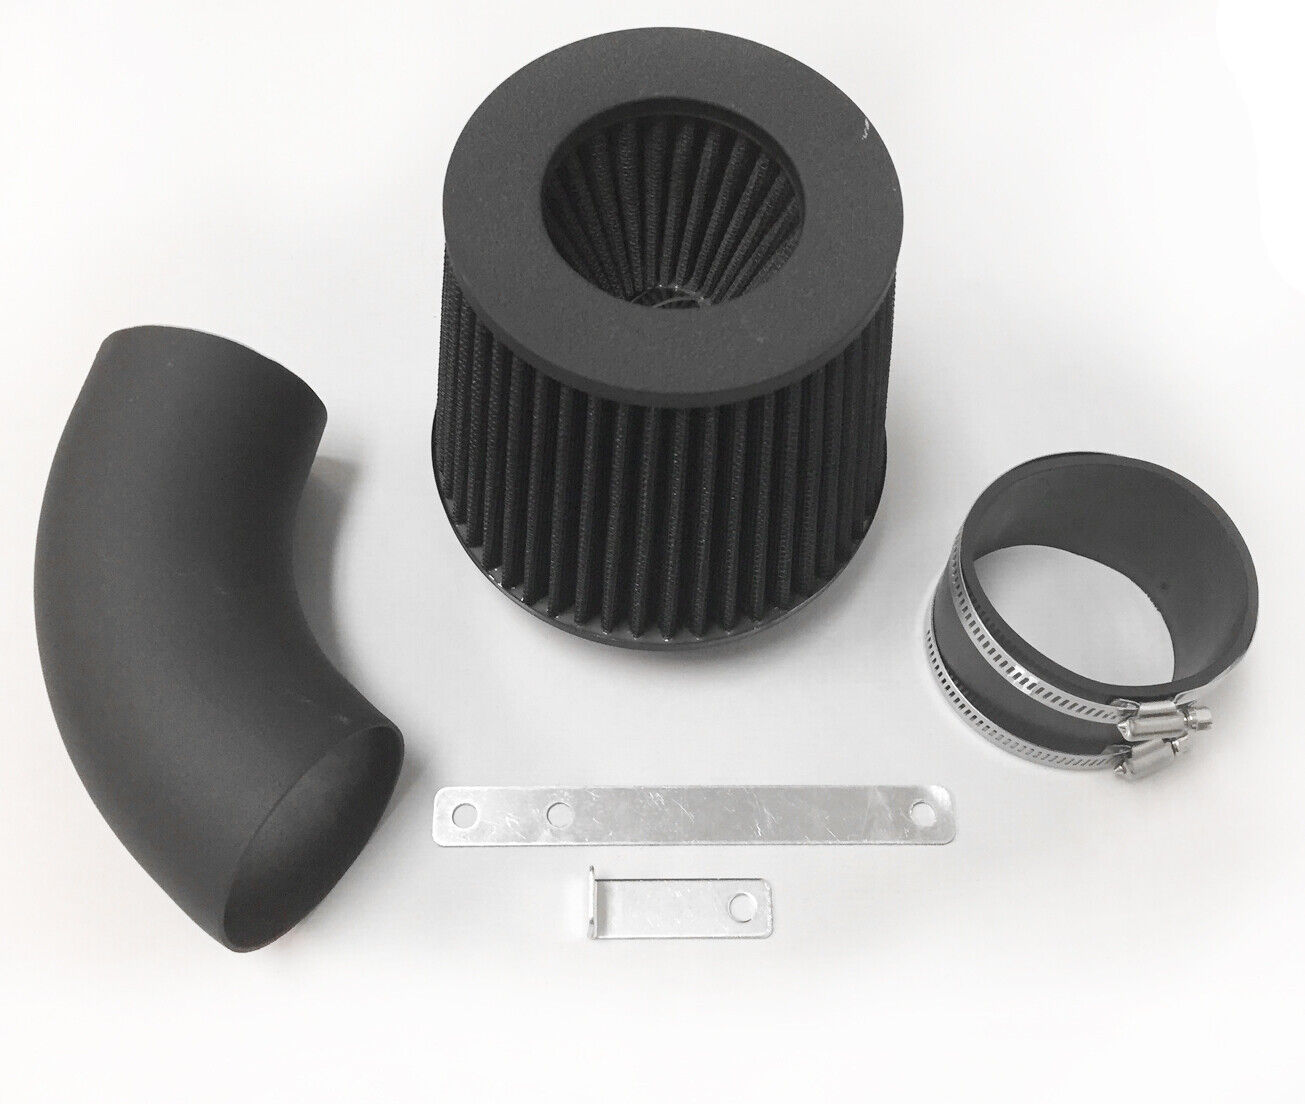 Coated Black For 1995-2005 Chevy Monte Carlo 3.8L V6 Air Intake System Kit